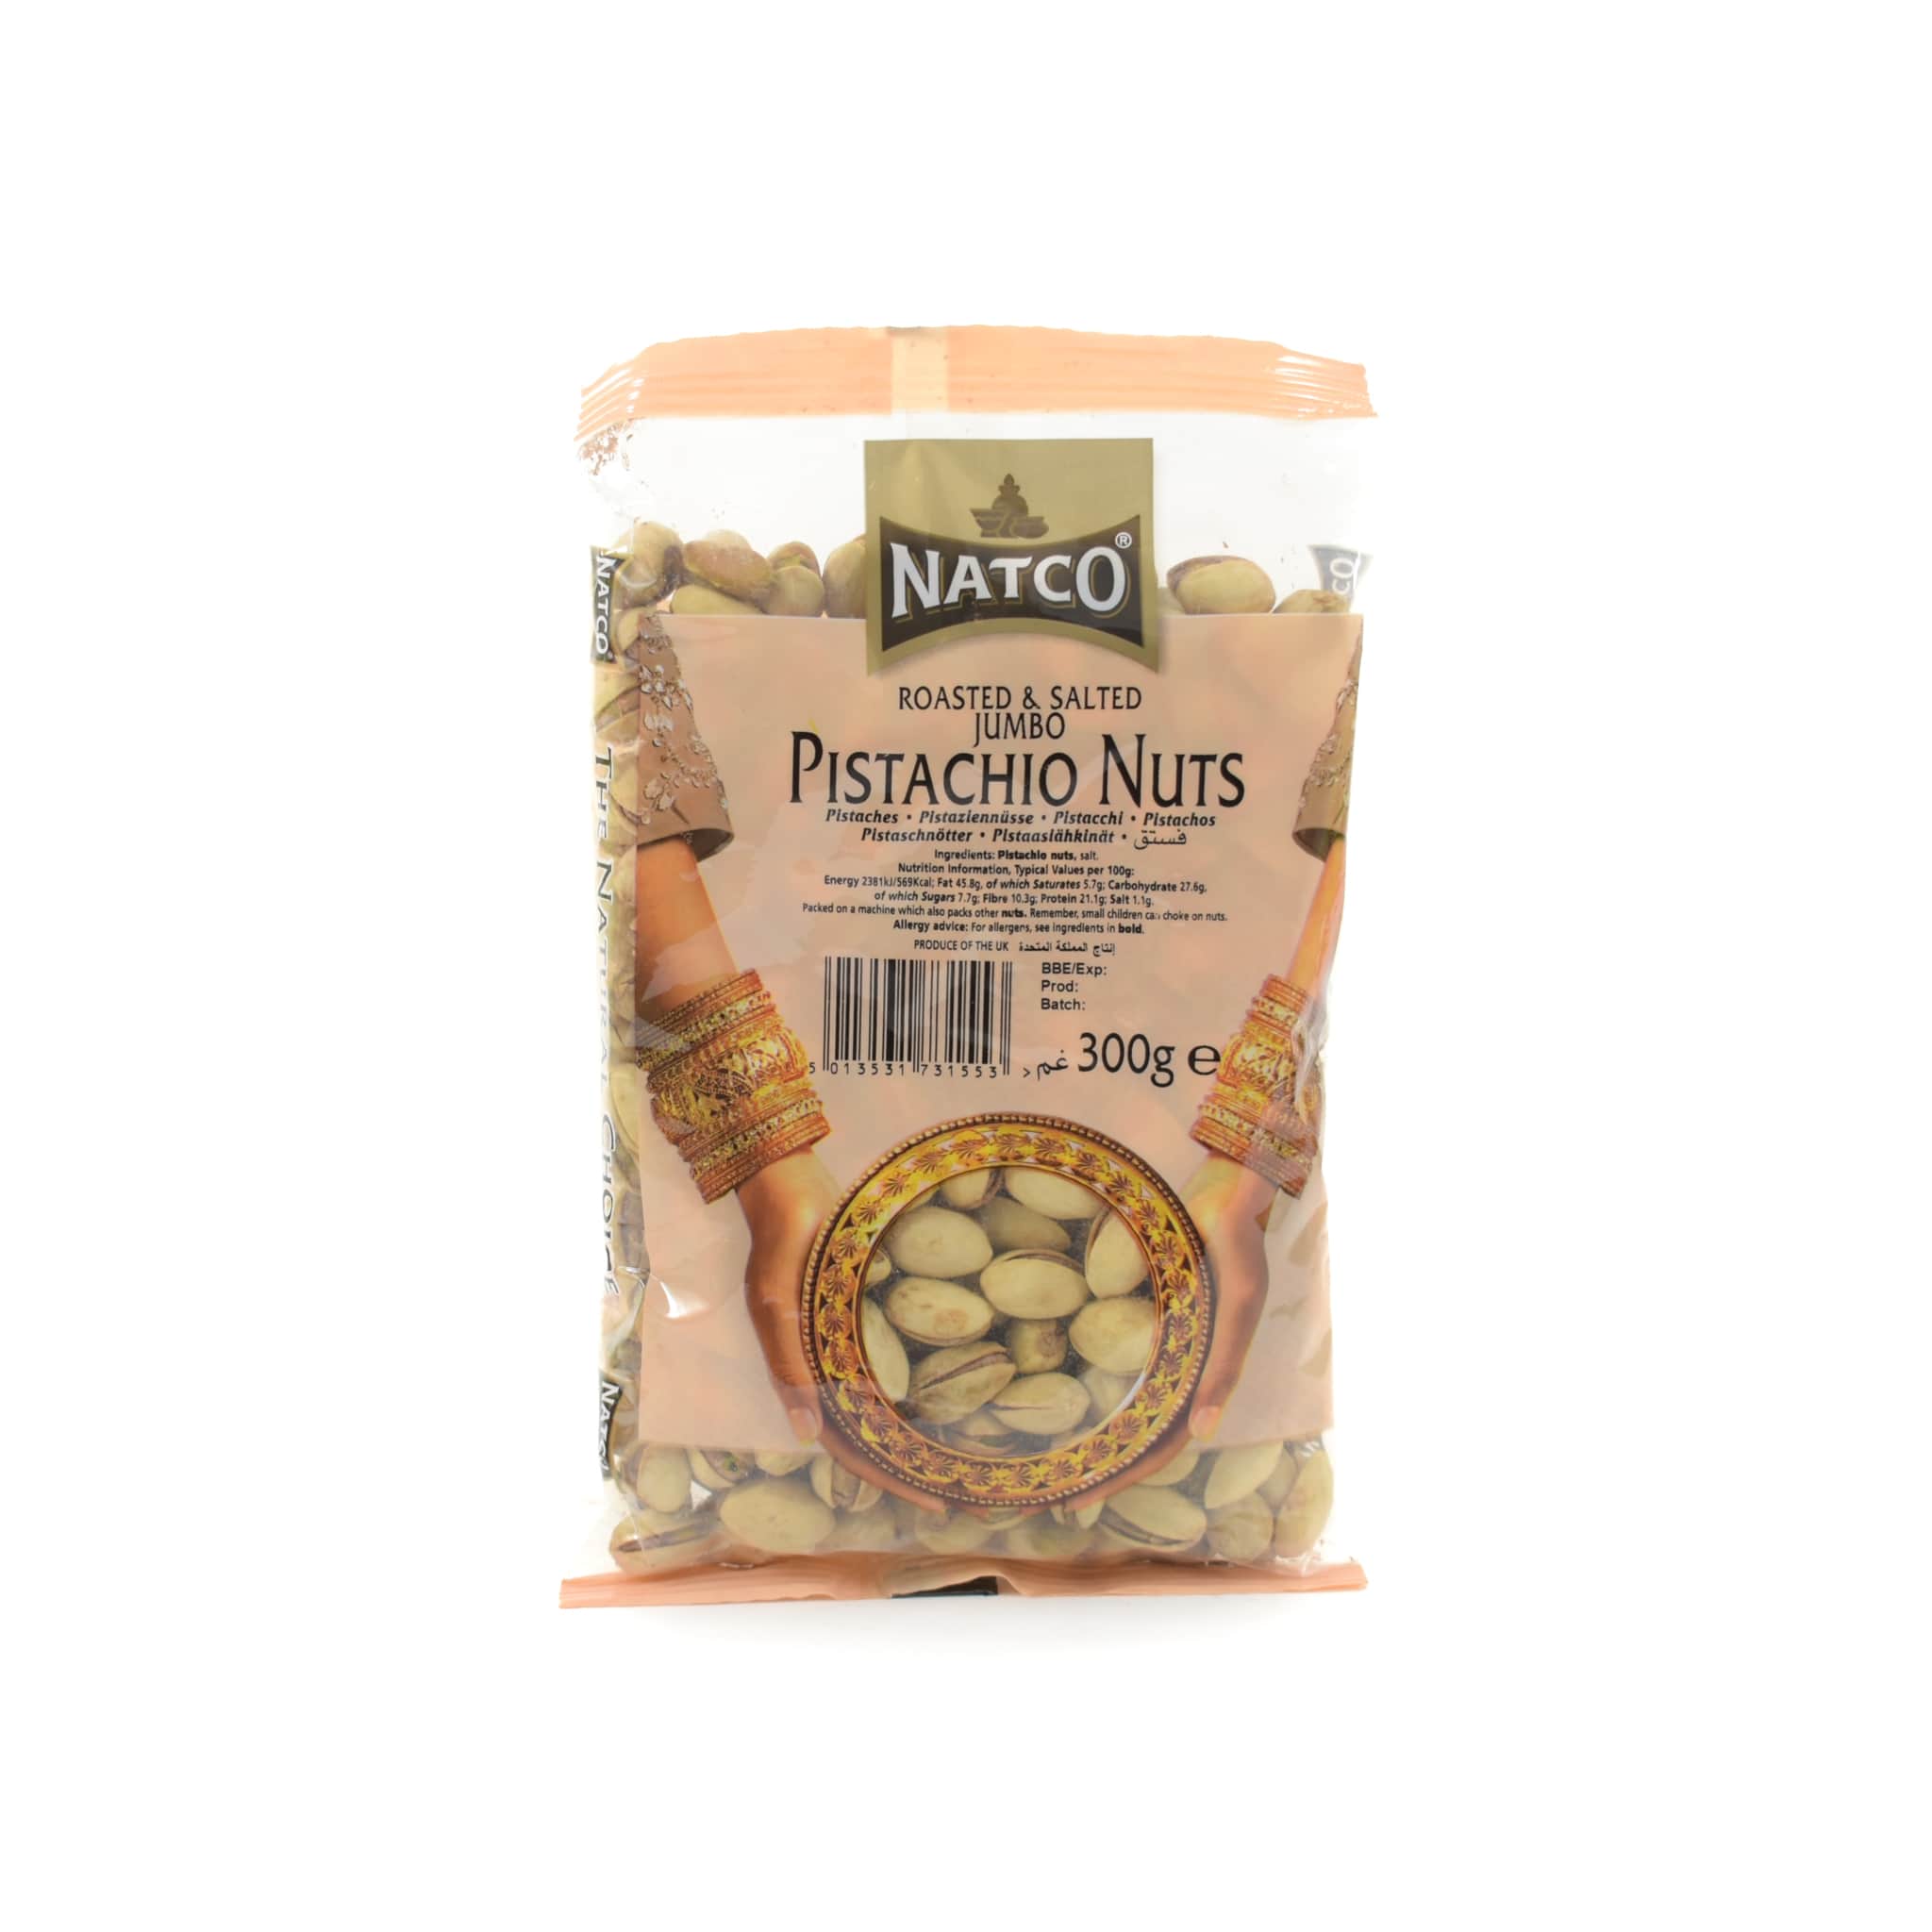 Natco Roasted & Salted Pistachios 300g